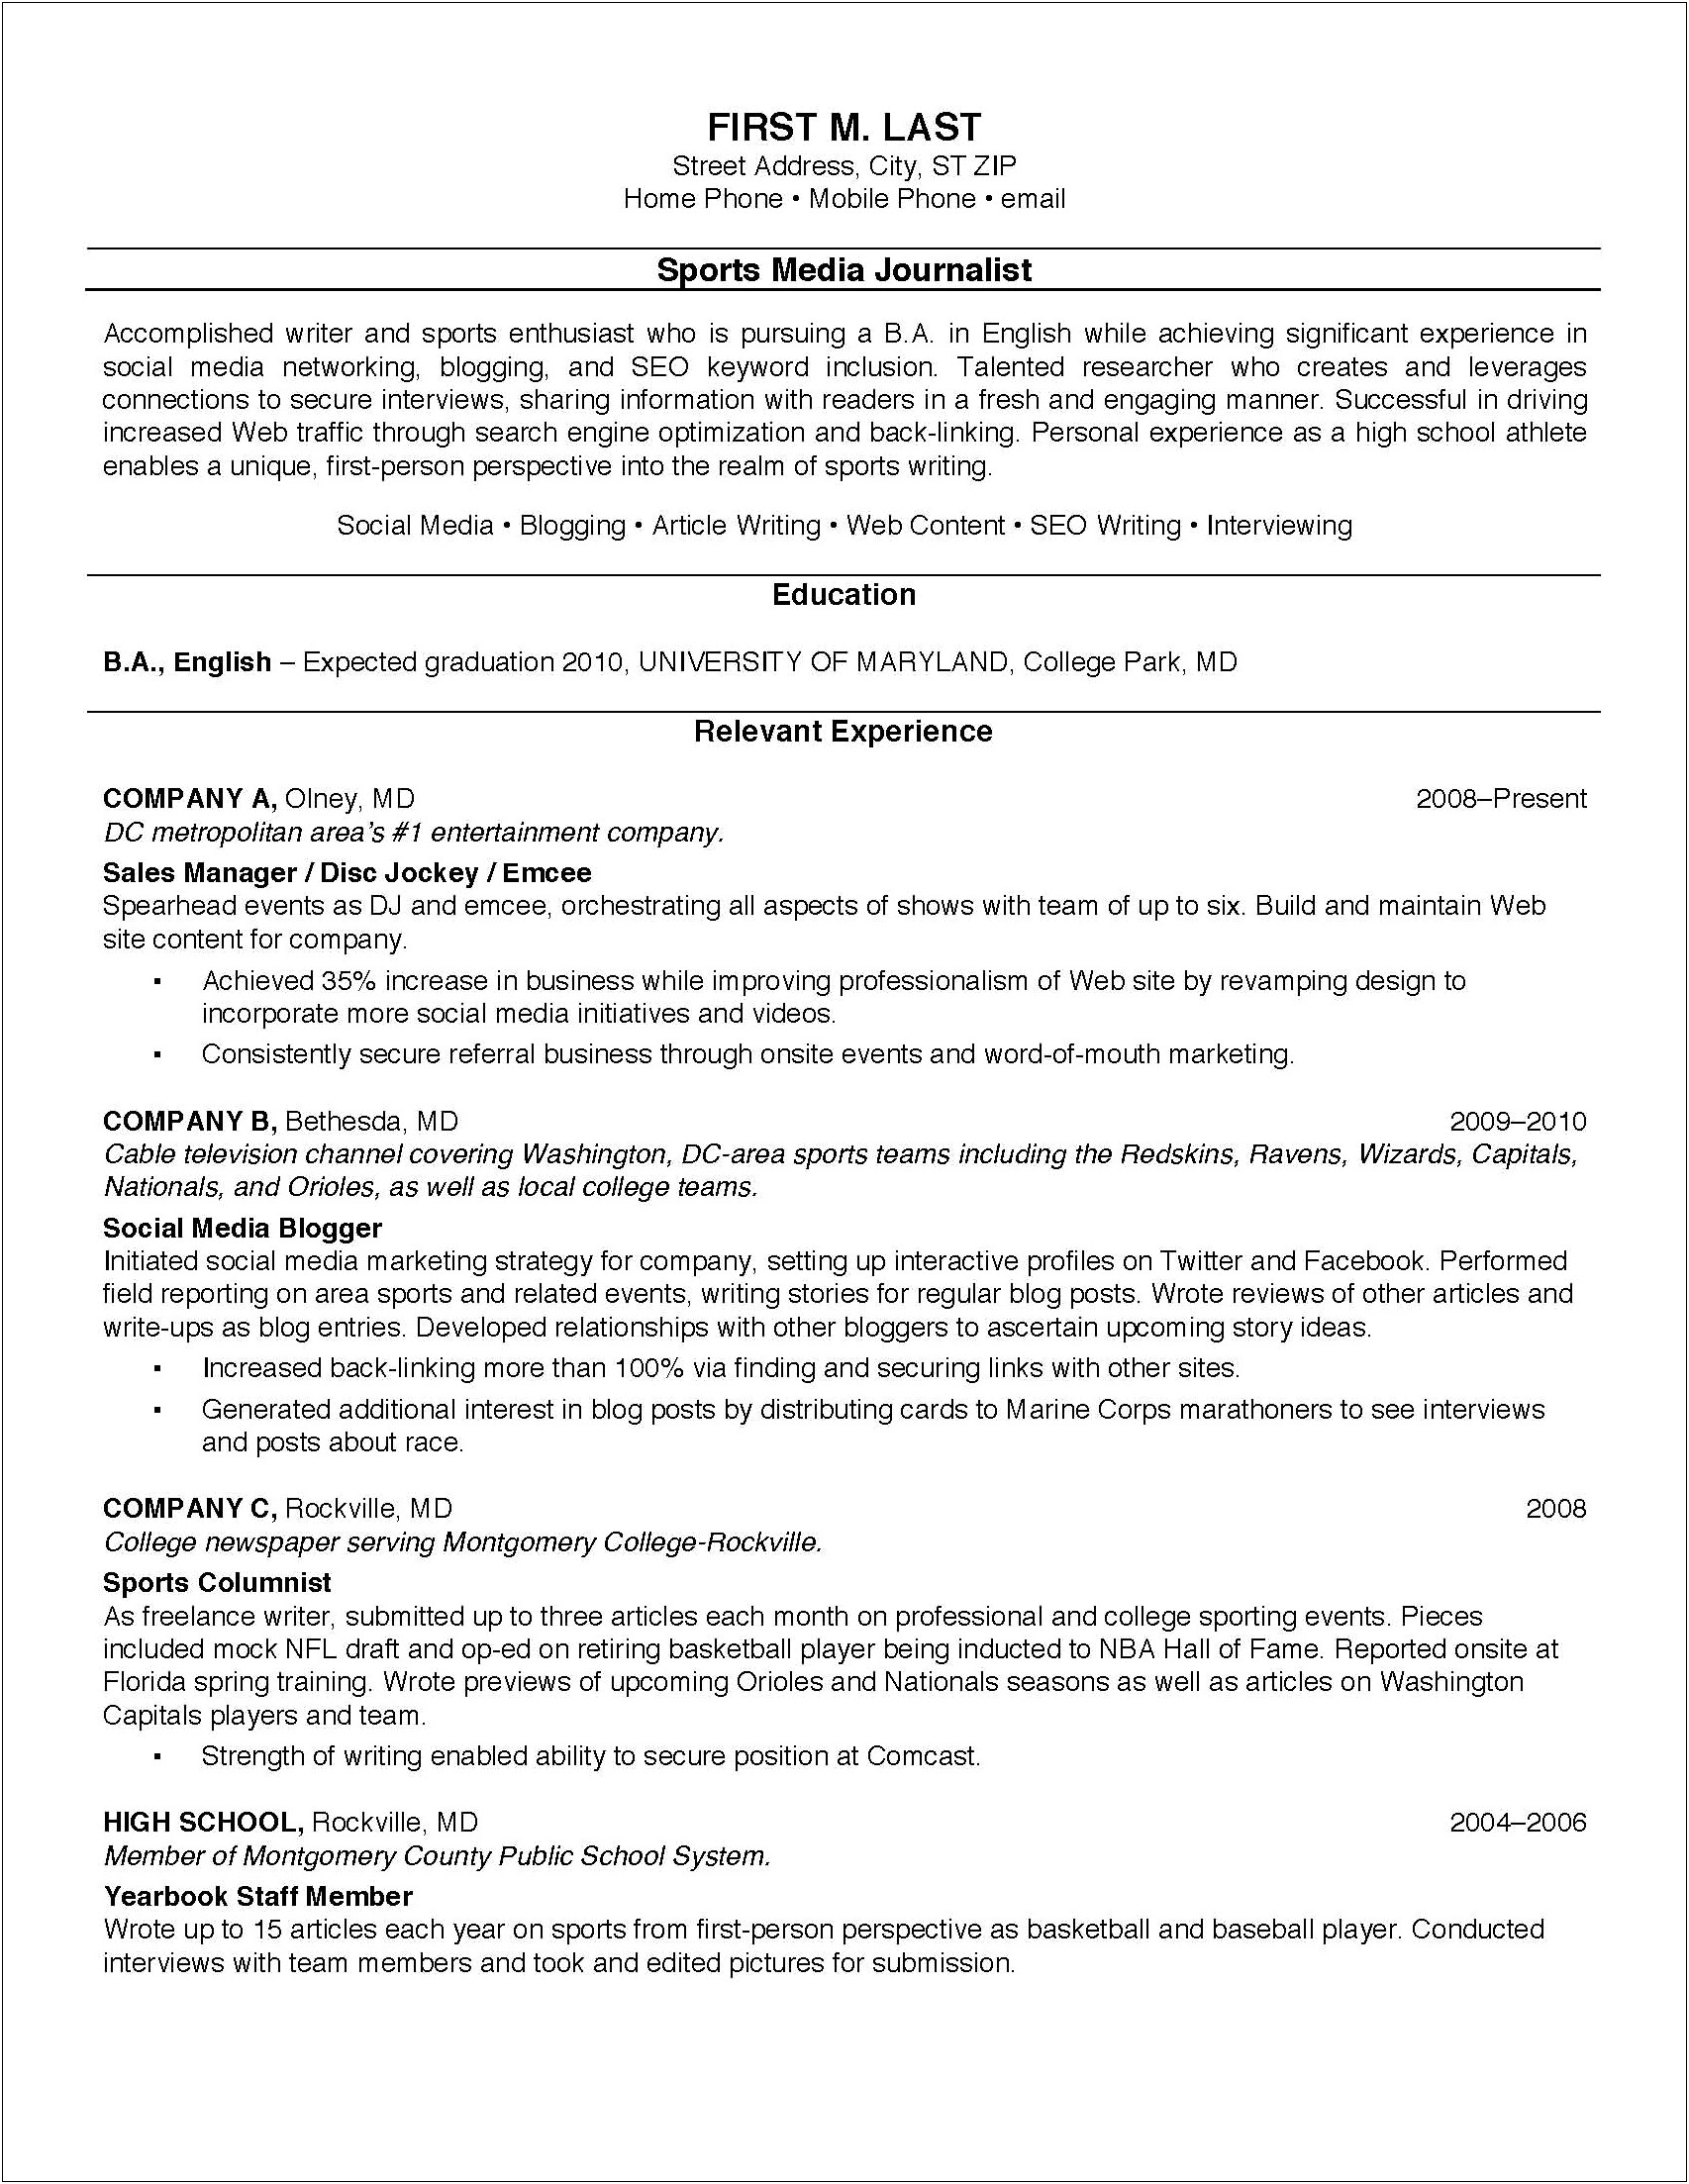 Resume For Jobs Outline College Students